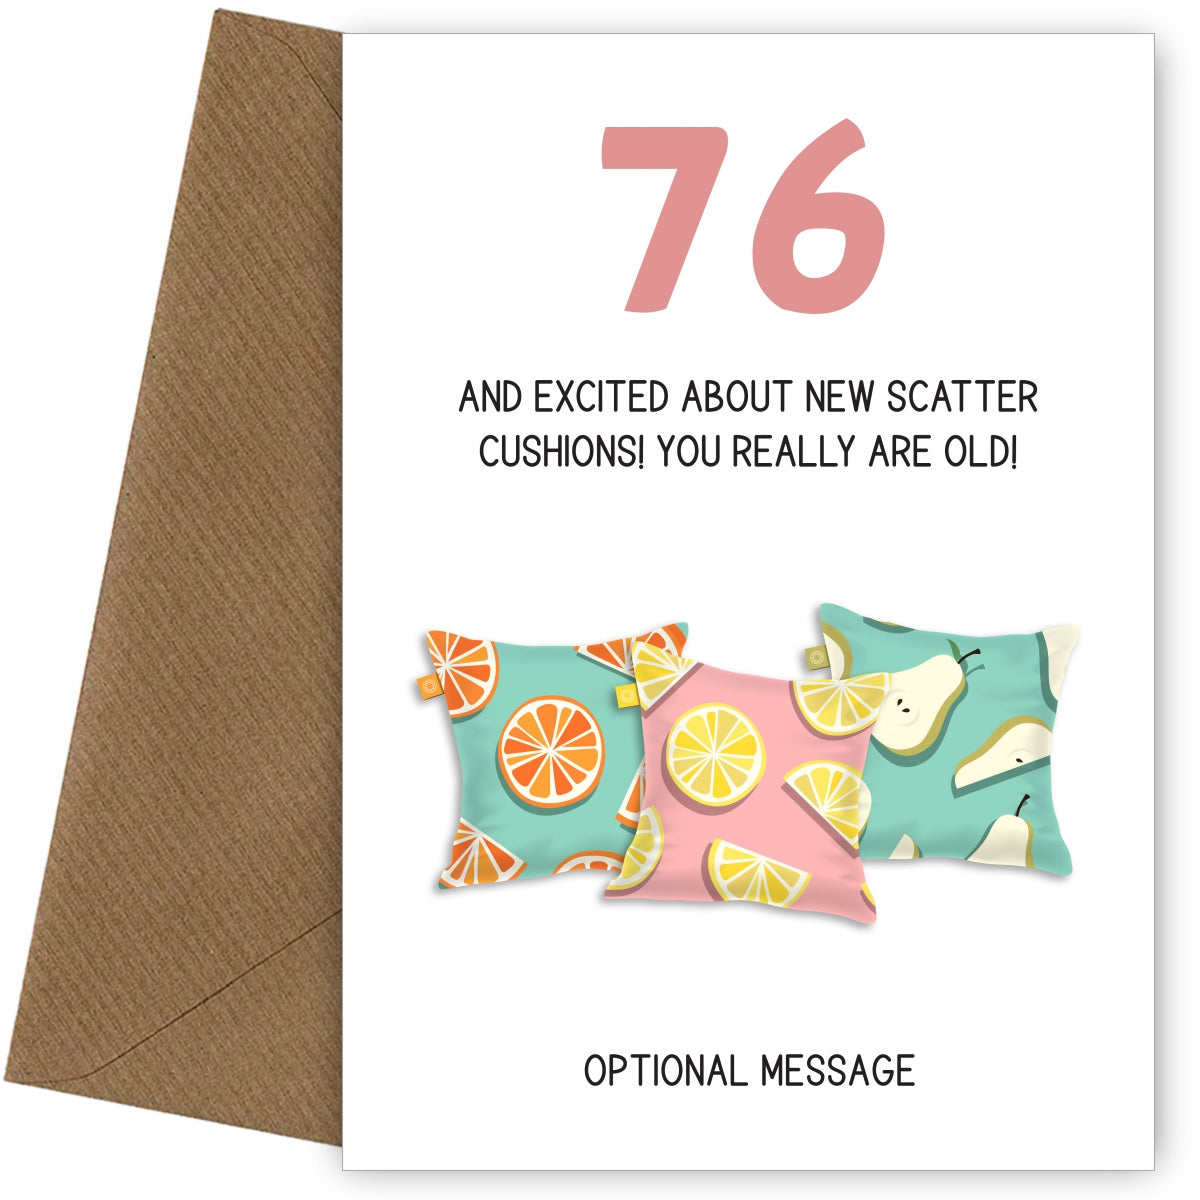 Happy 76th Birthday Card - Excited About Scatter Cushions!